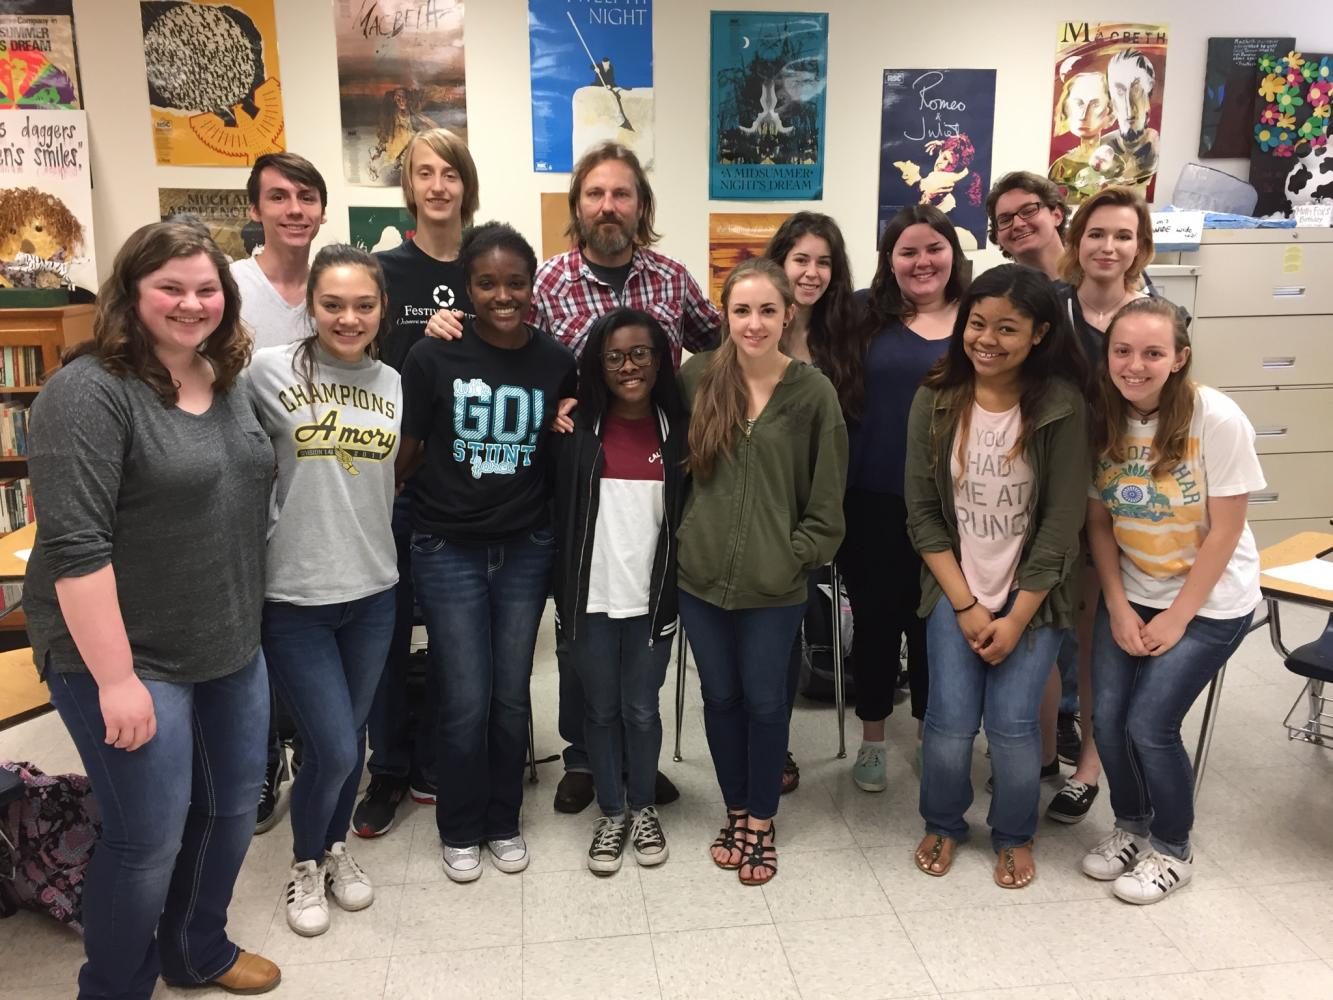 The first class of Creative Writing students pose with Micheal Farris Smith during his visit to class.